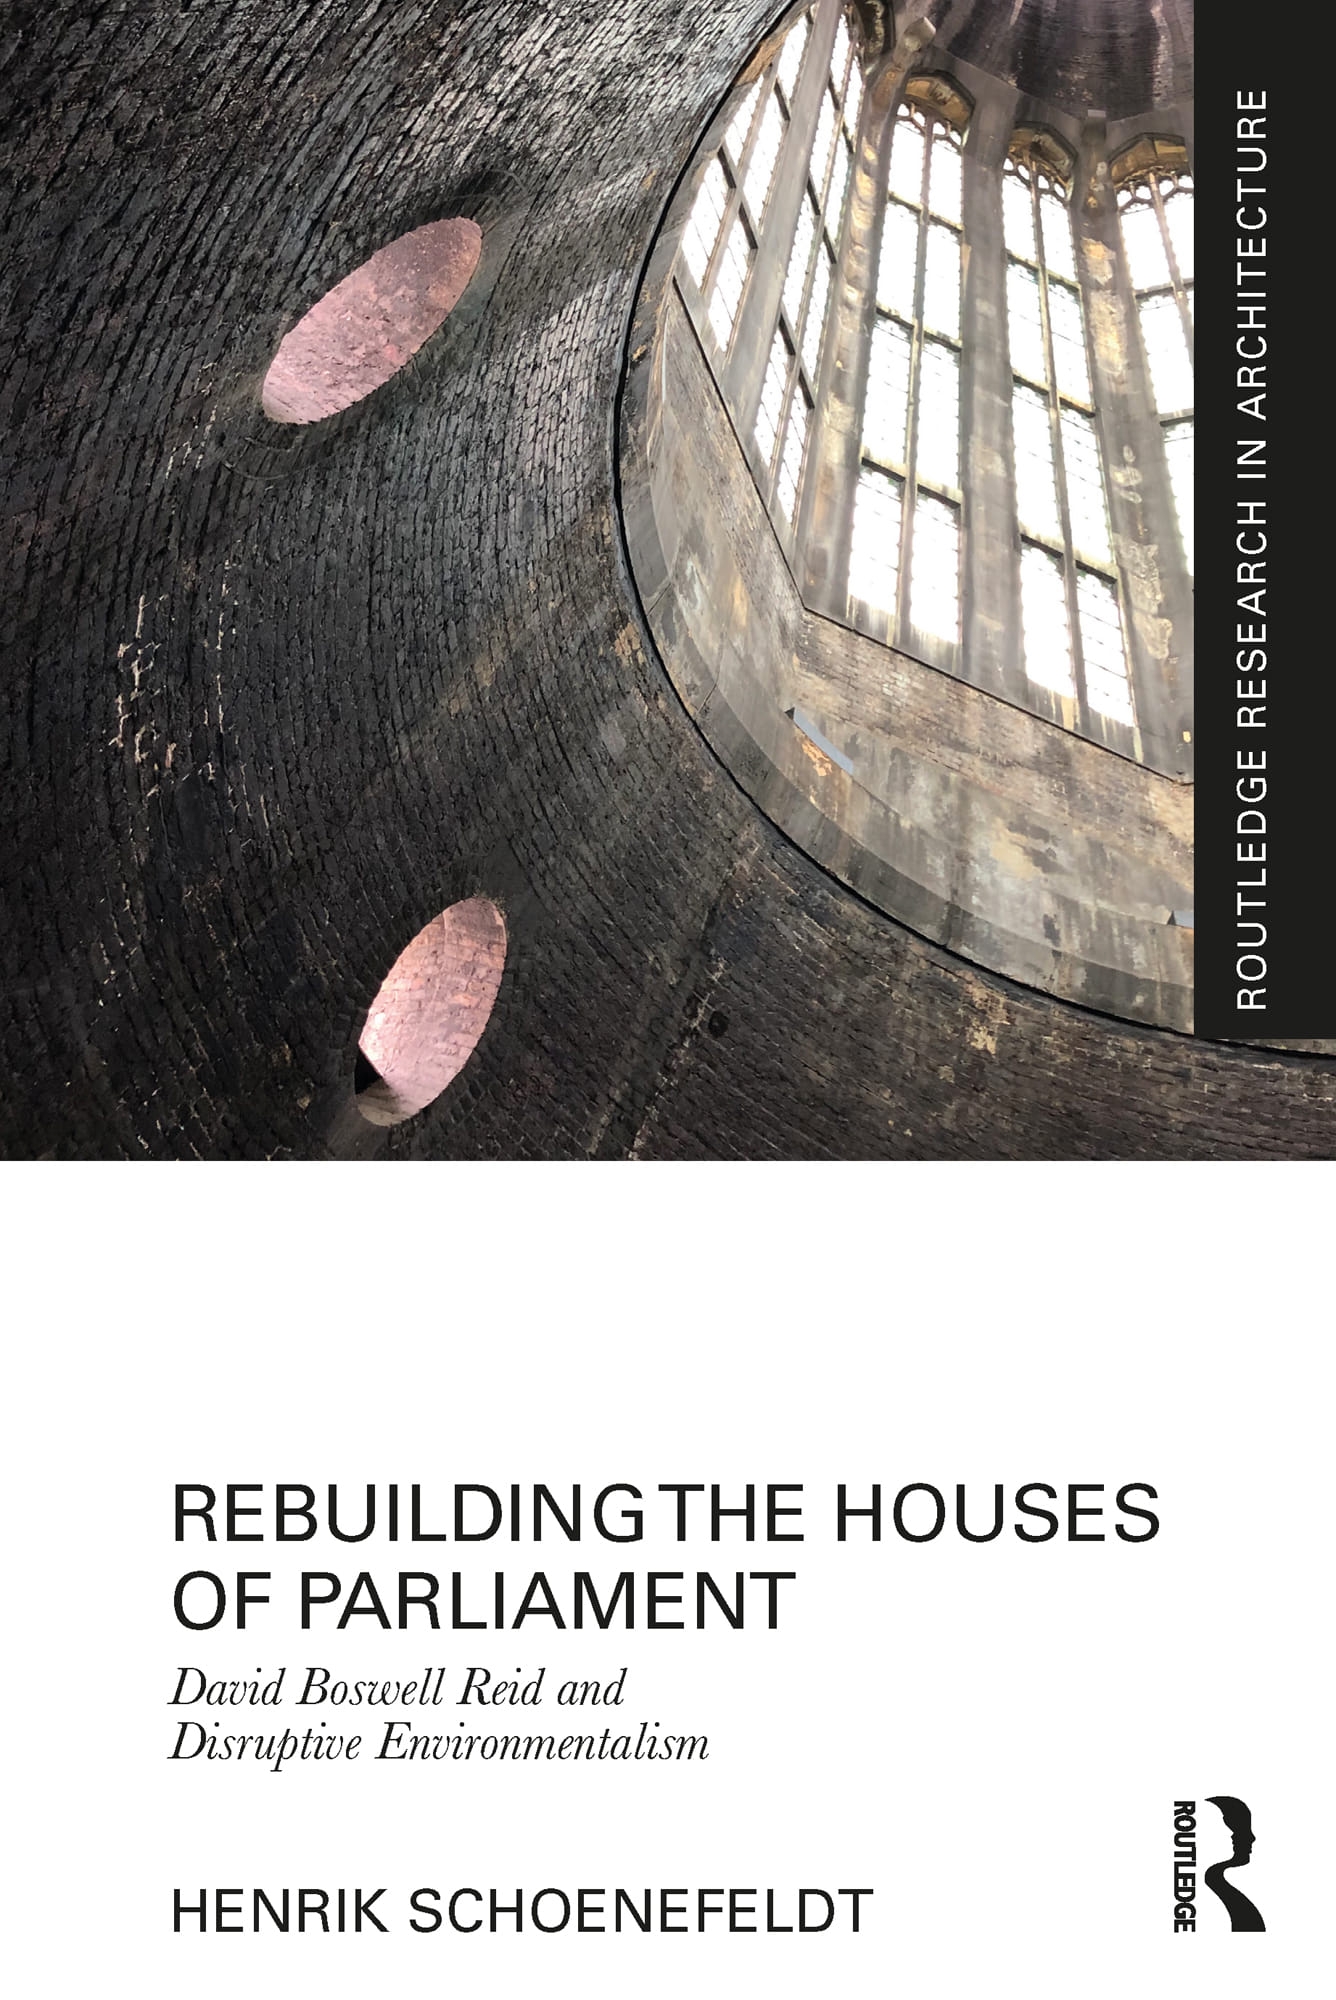 Rebuilding the Houses of Parliament: David Boswell Reid and Disruptive Environmentalism